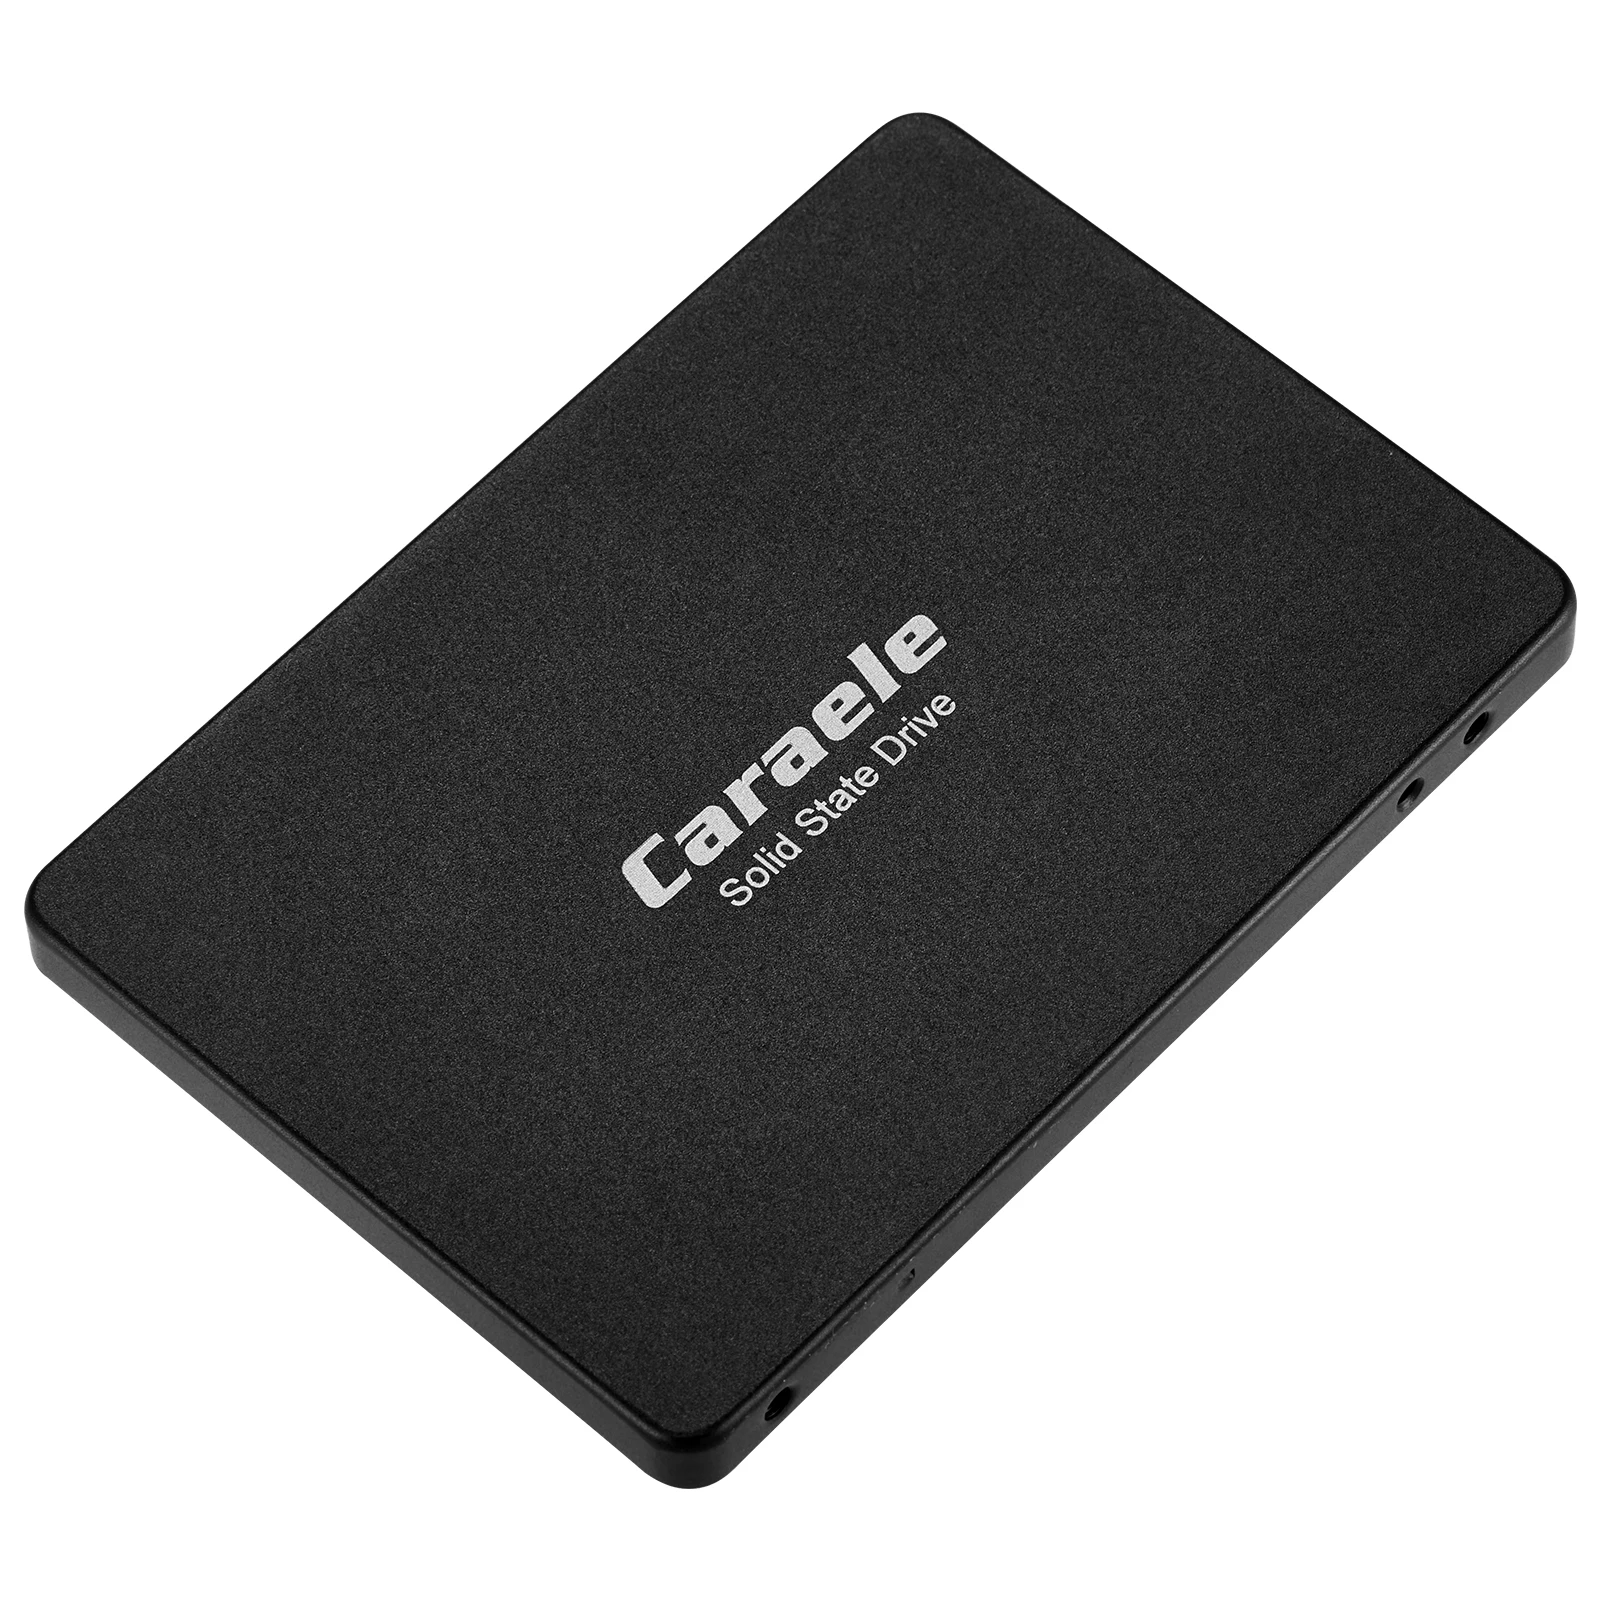 Caraele K500 2.5 INCH Internal Solid State Drives Storage Devices SATA III SSD 512GB 1TB SSD HARD Drive for Laptops,Computer,PC